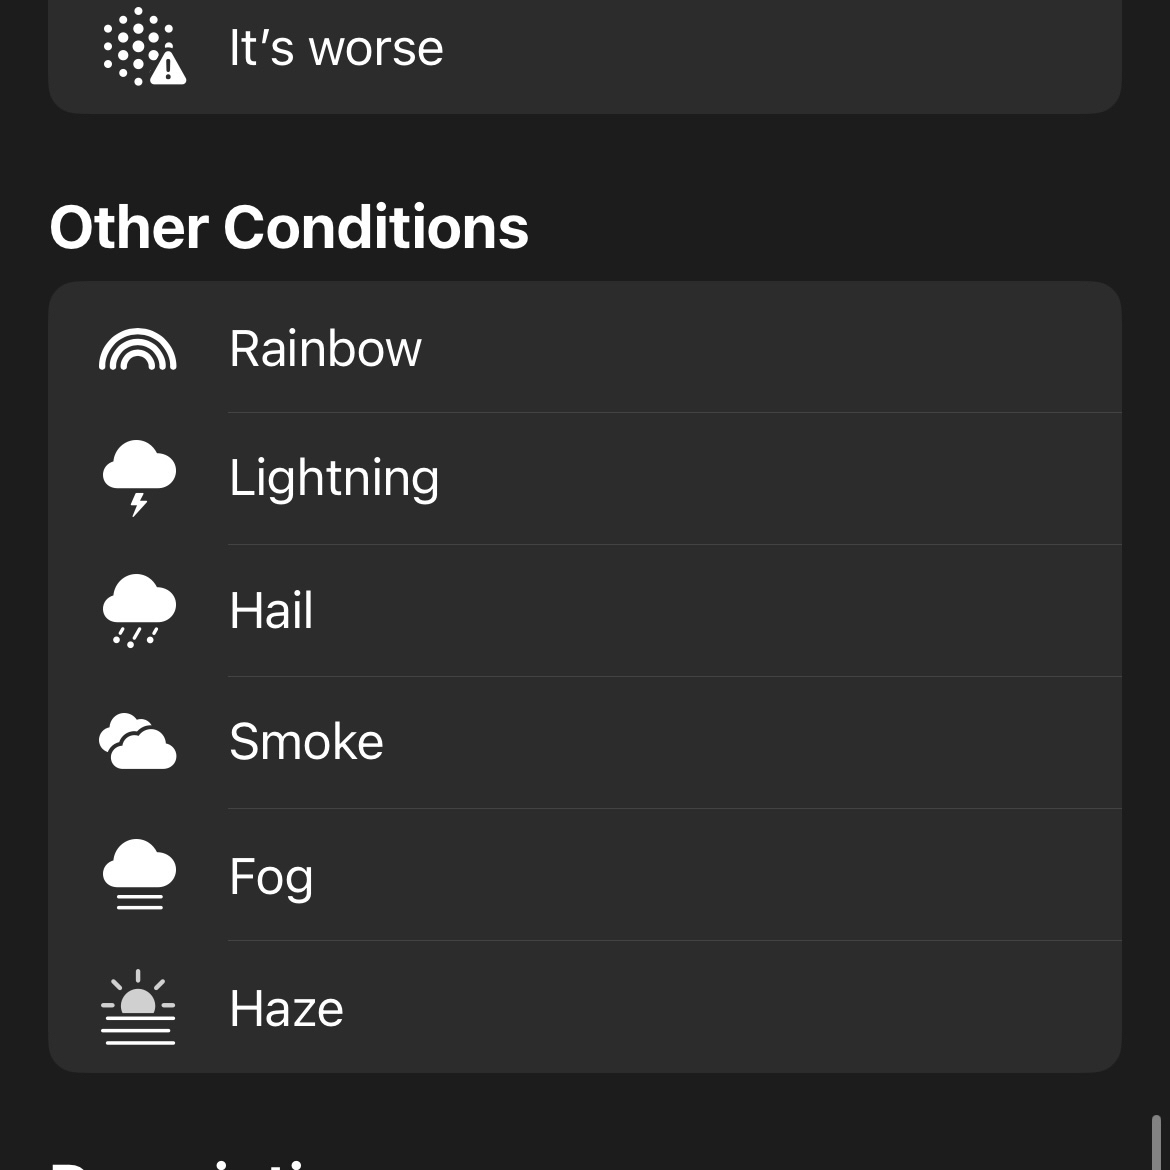 A screenshot of a weather app showing different conditions. The title *Other Conditions* is followed by a list: Rainbow, Lightning, Hail, Smoke, Fog, and Haze, each with corresponding icons.